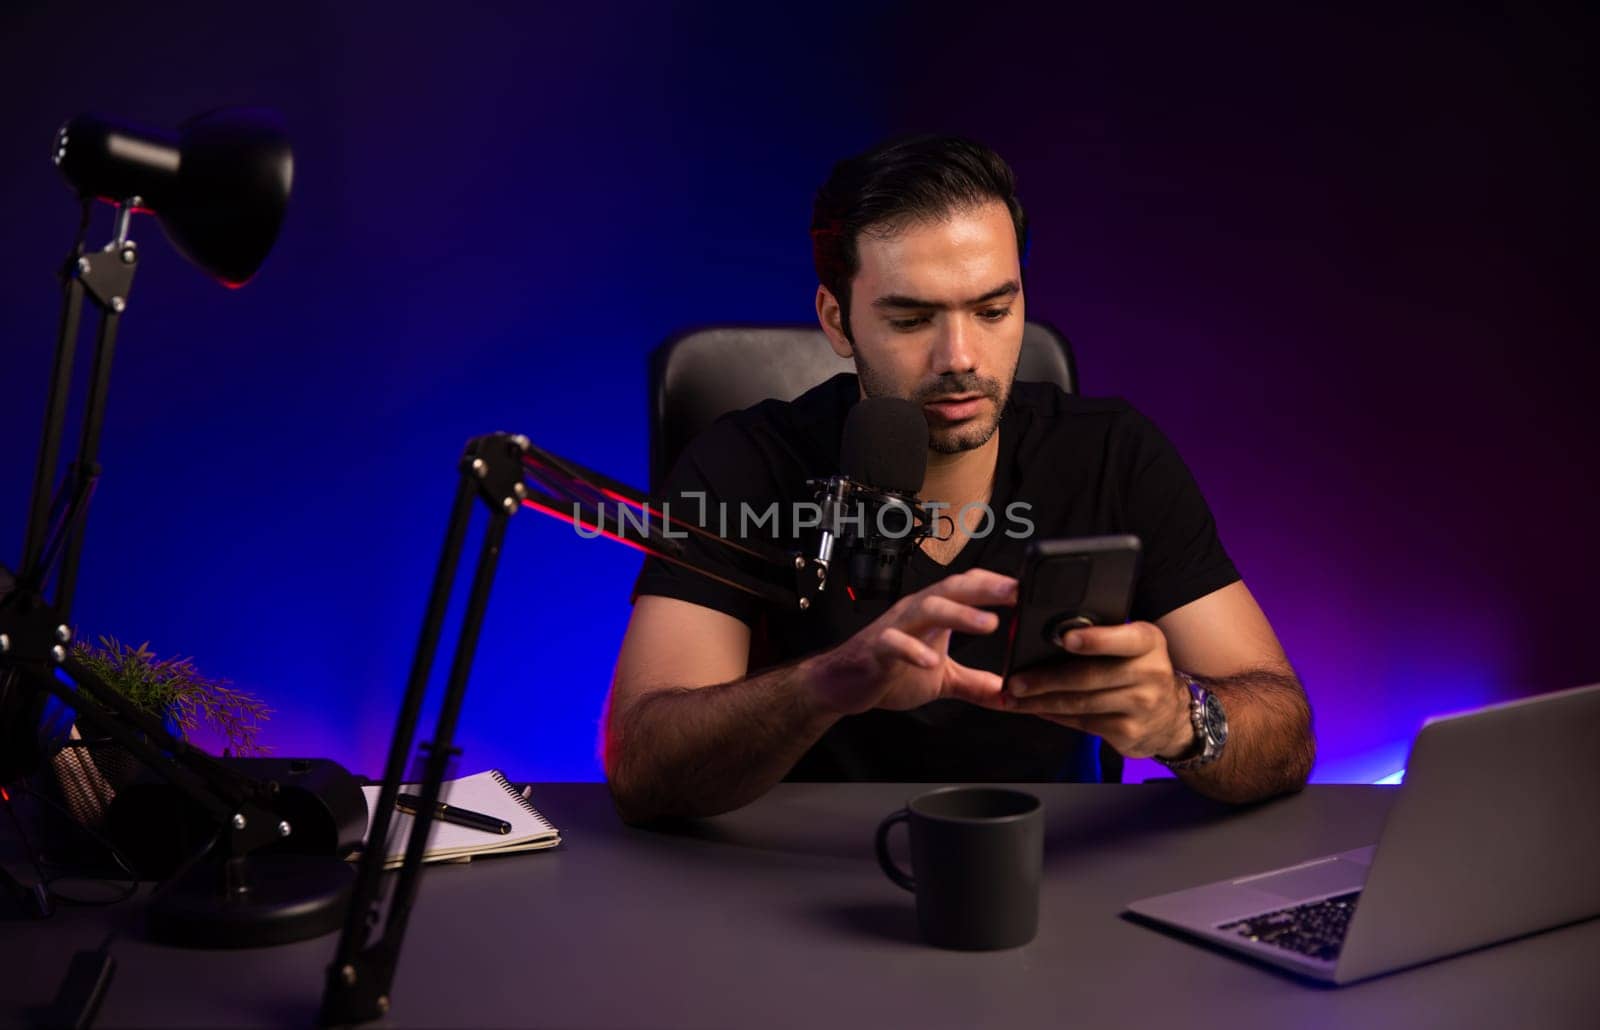 Broadcaster talking to listener on live streaming online, checking message from smartphone on social media in host channel by creative positive thinking concept at purple neon light studio. Surmise.